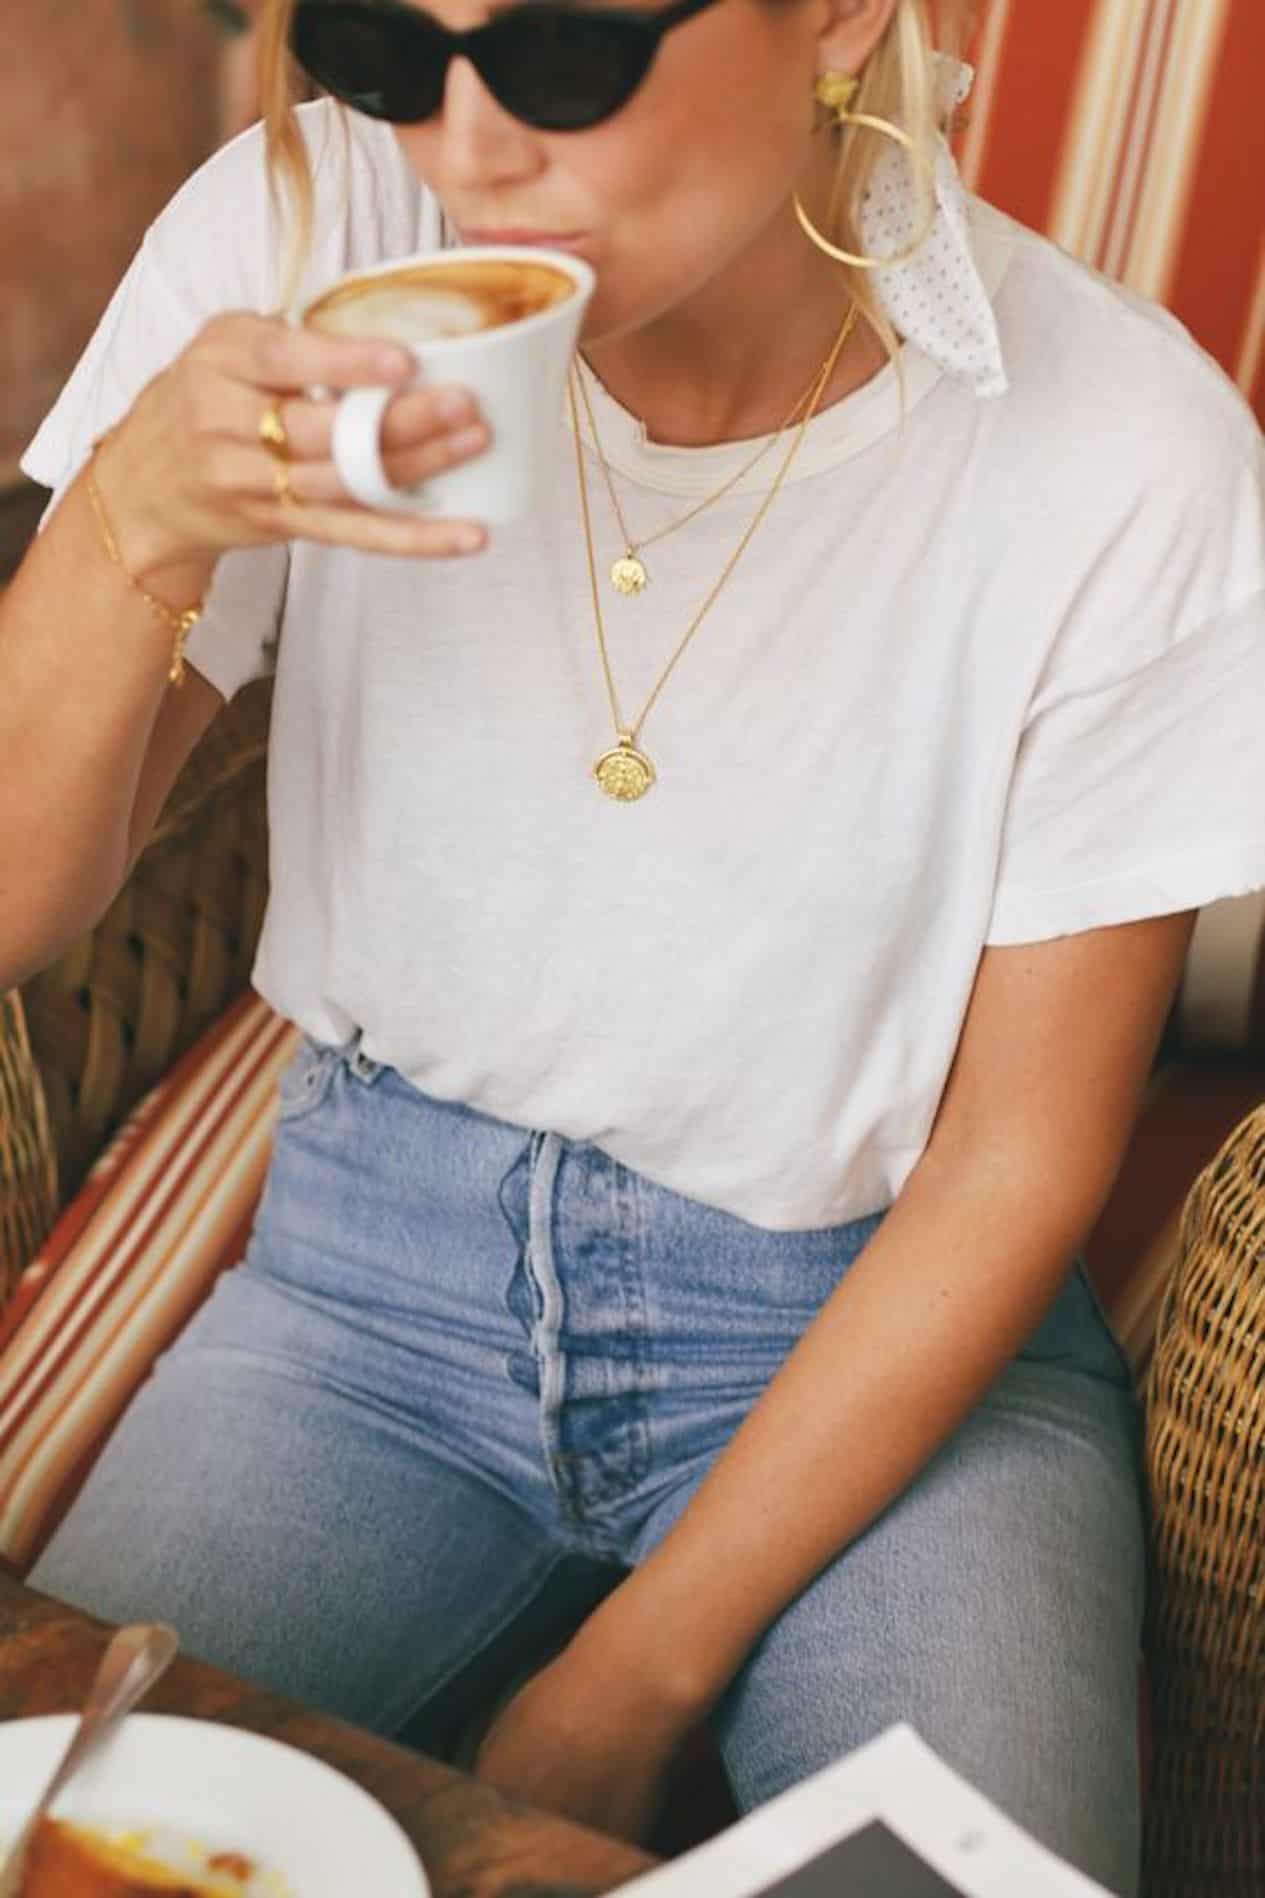 image of a woman up close wearing a white t-shirt and layered pendant necklaces